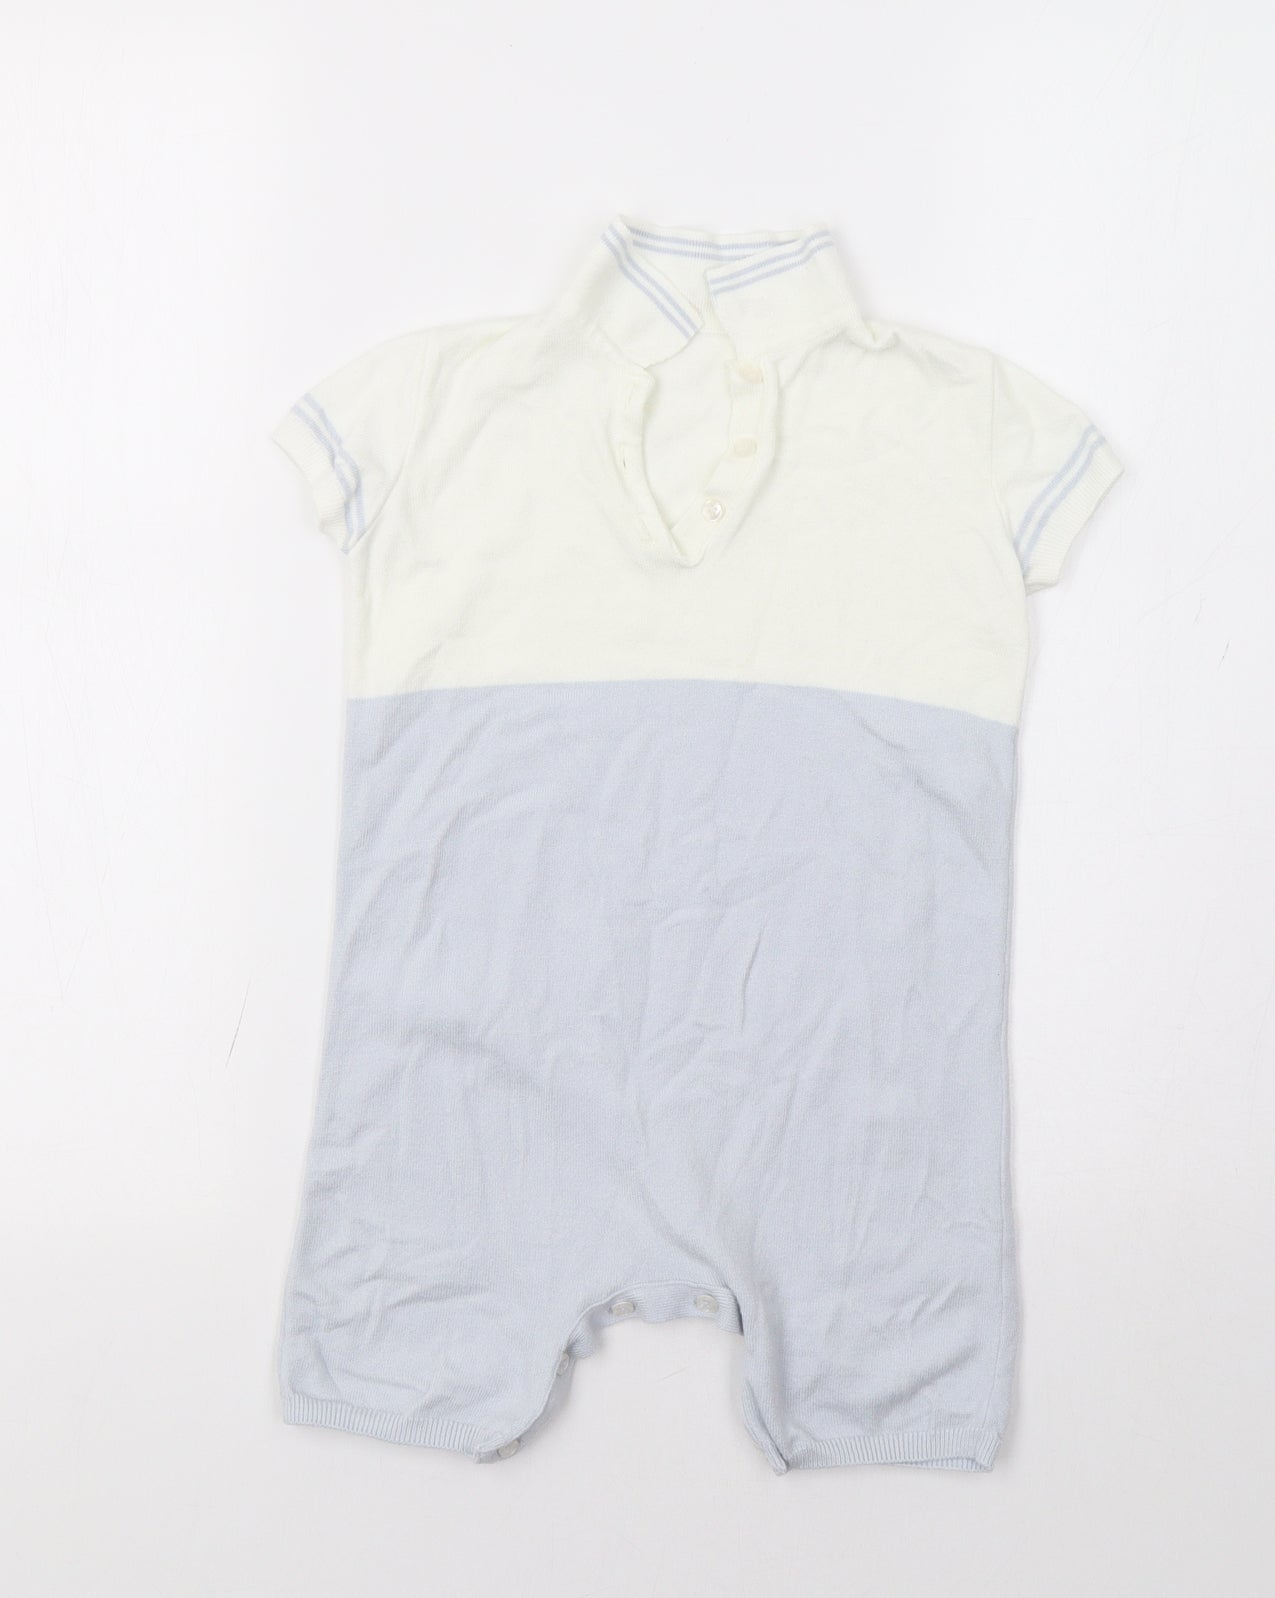 George Girls Blue   Romper One-Piece Size 3-4 Years